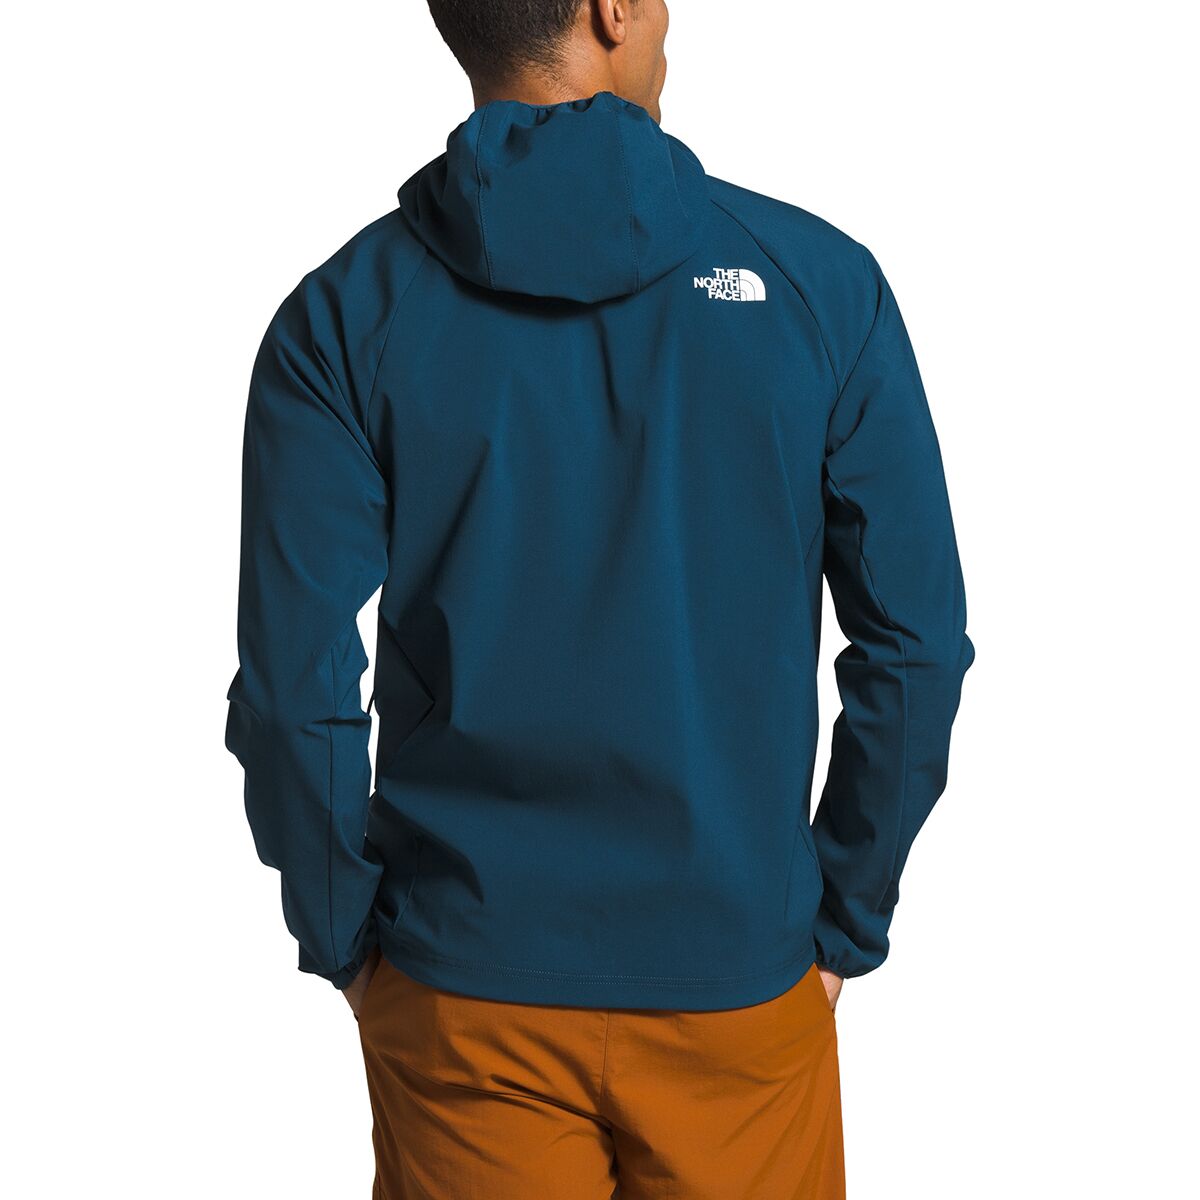 The North Face Apex Nimble Hooded Jacket - Men's - Clothing